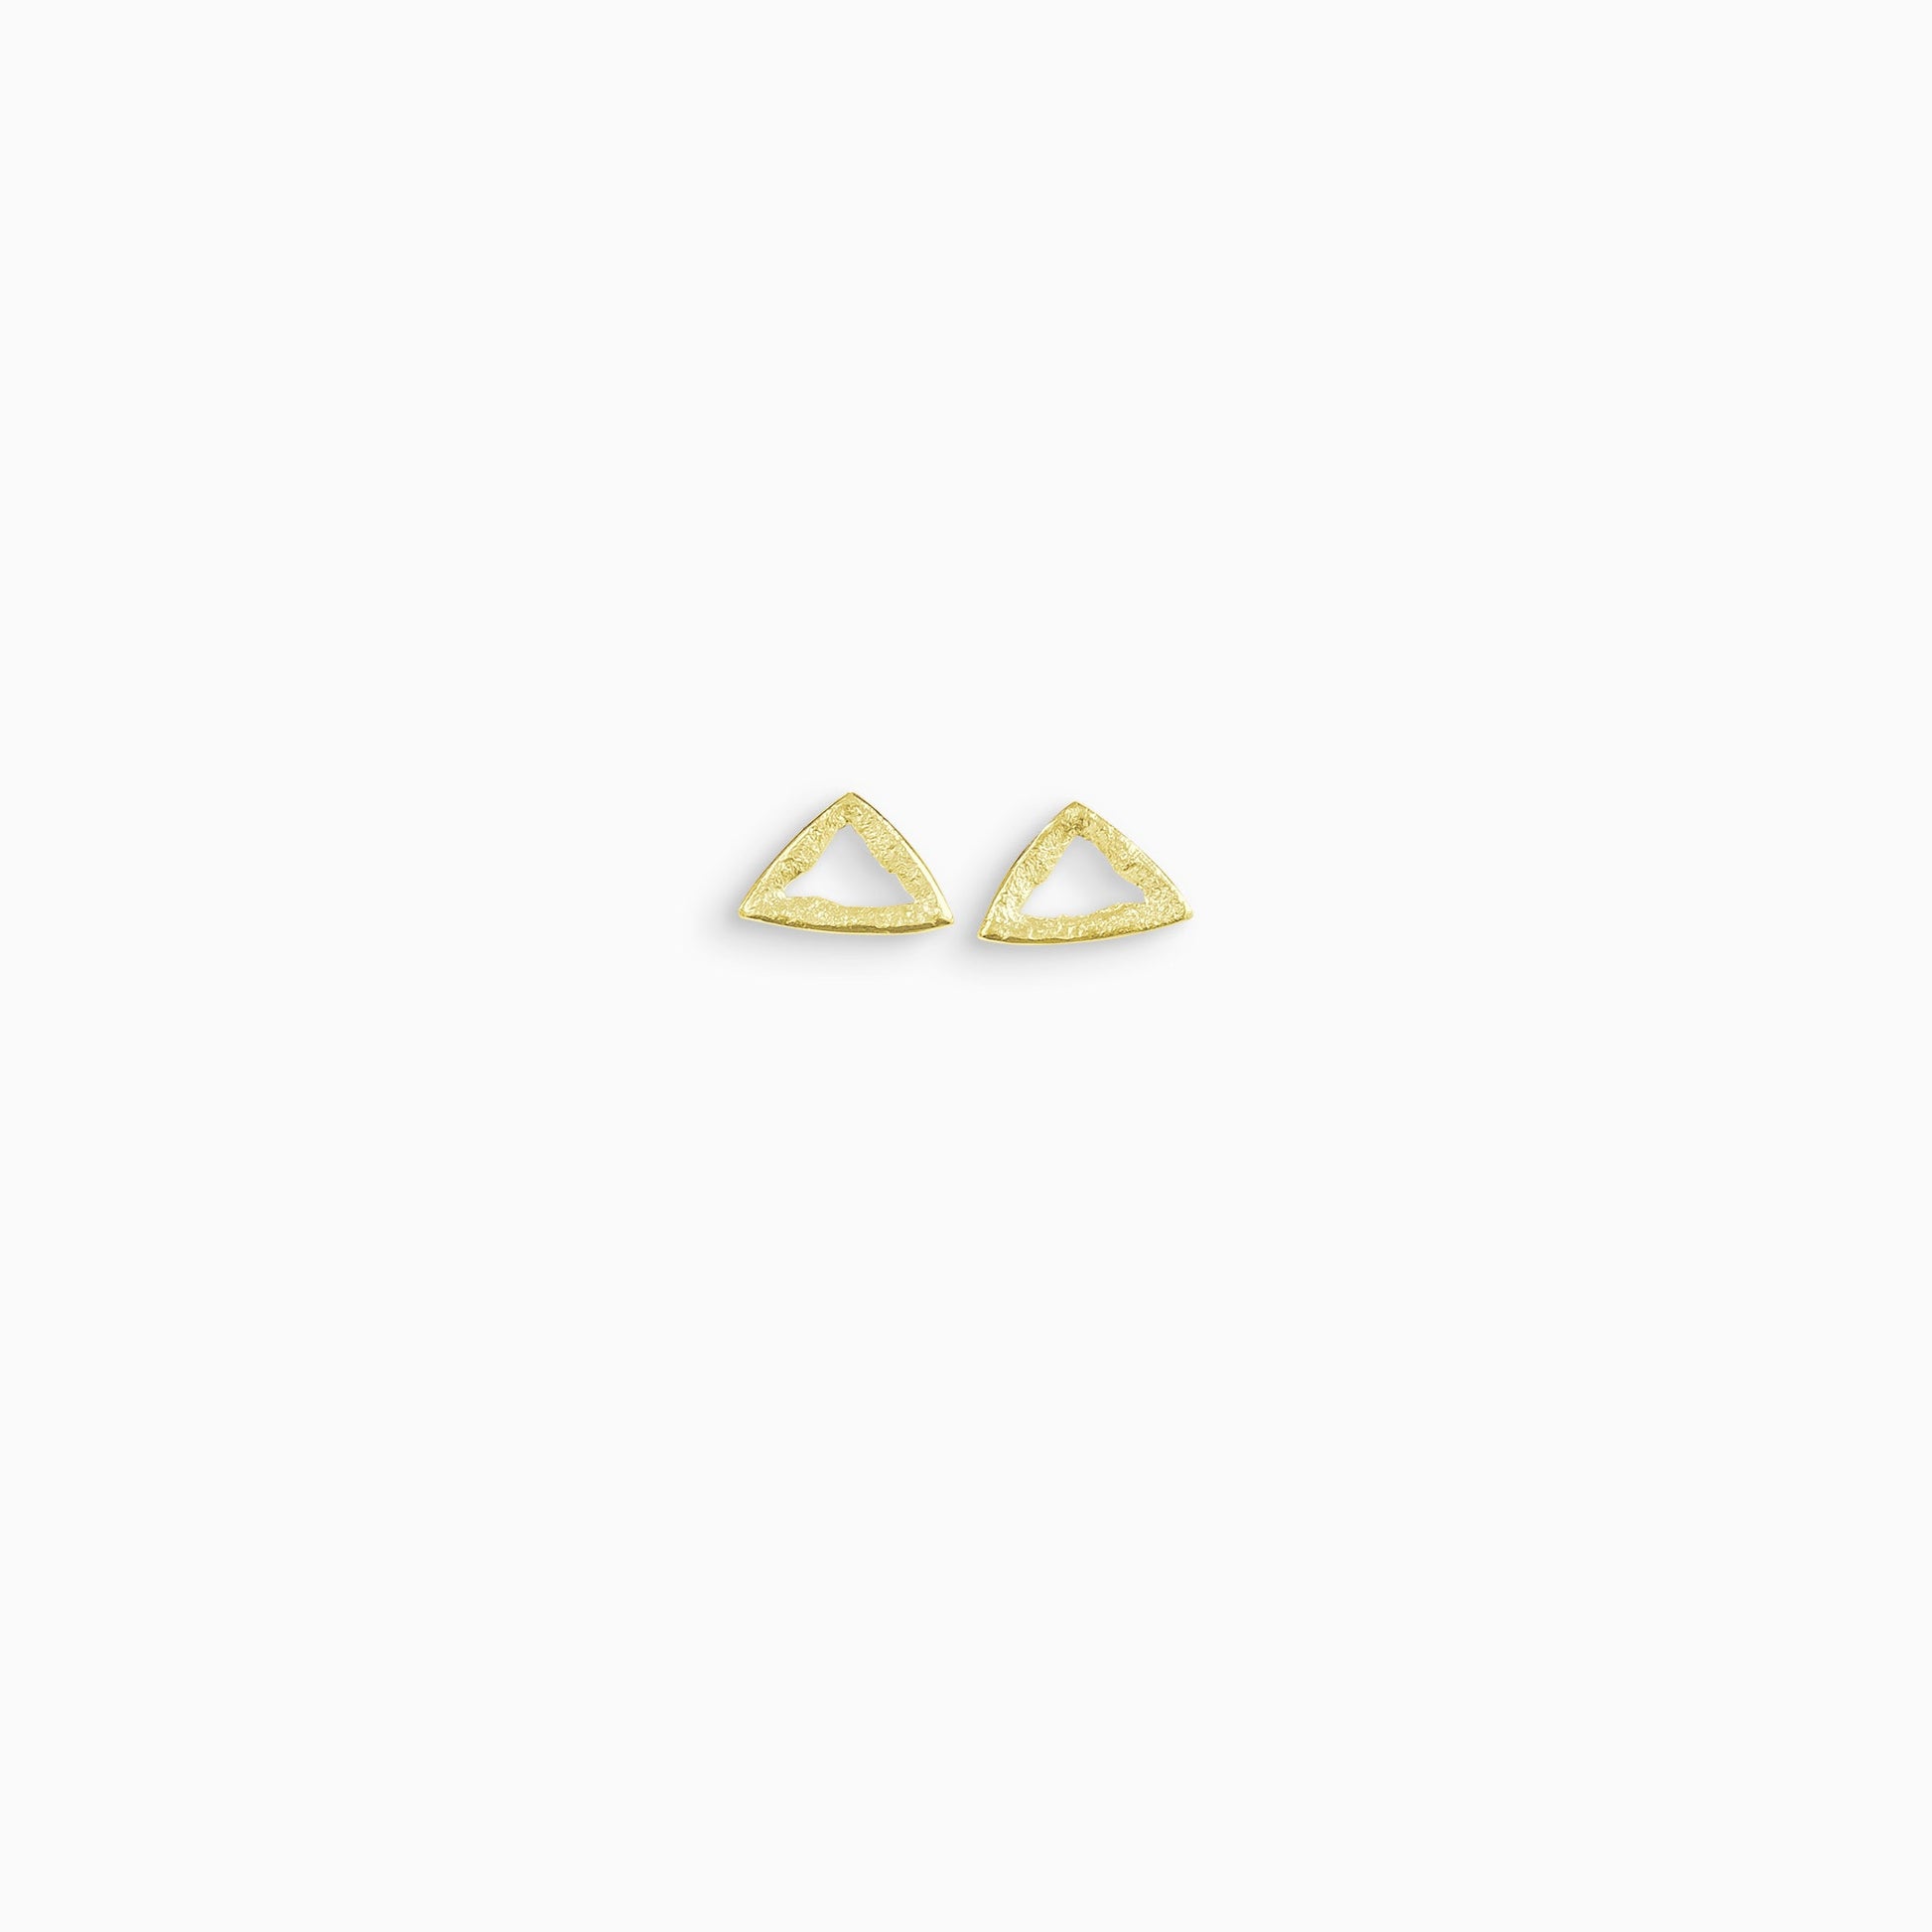 A pair of 18ct Fairtrade yellow gold stud earrings, triangular in form with an open centre. Strong organic texture. Smooth outside edge, fragmented inside edges. 14mm x 14mm x14mm 